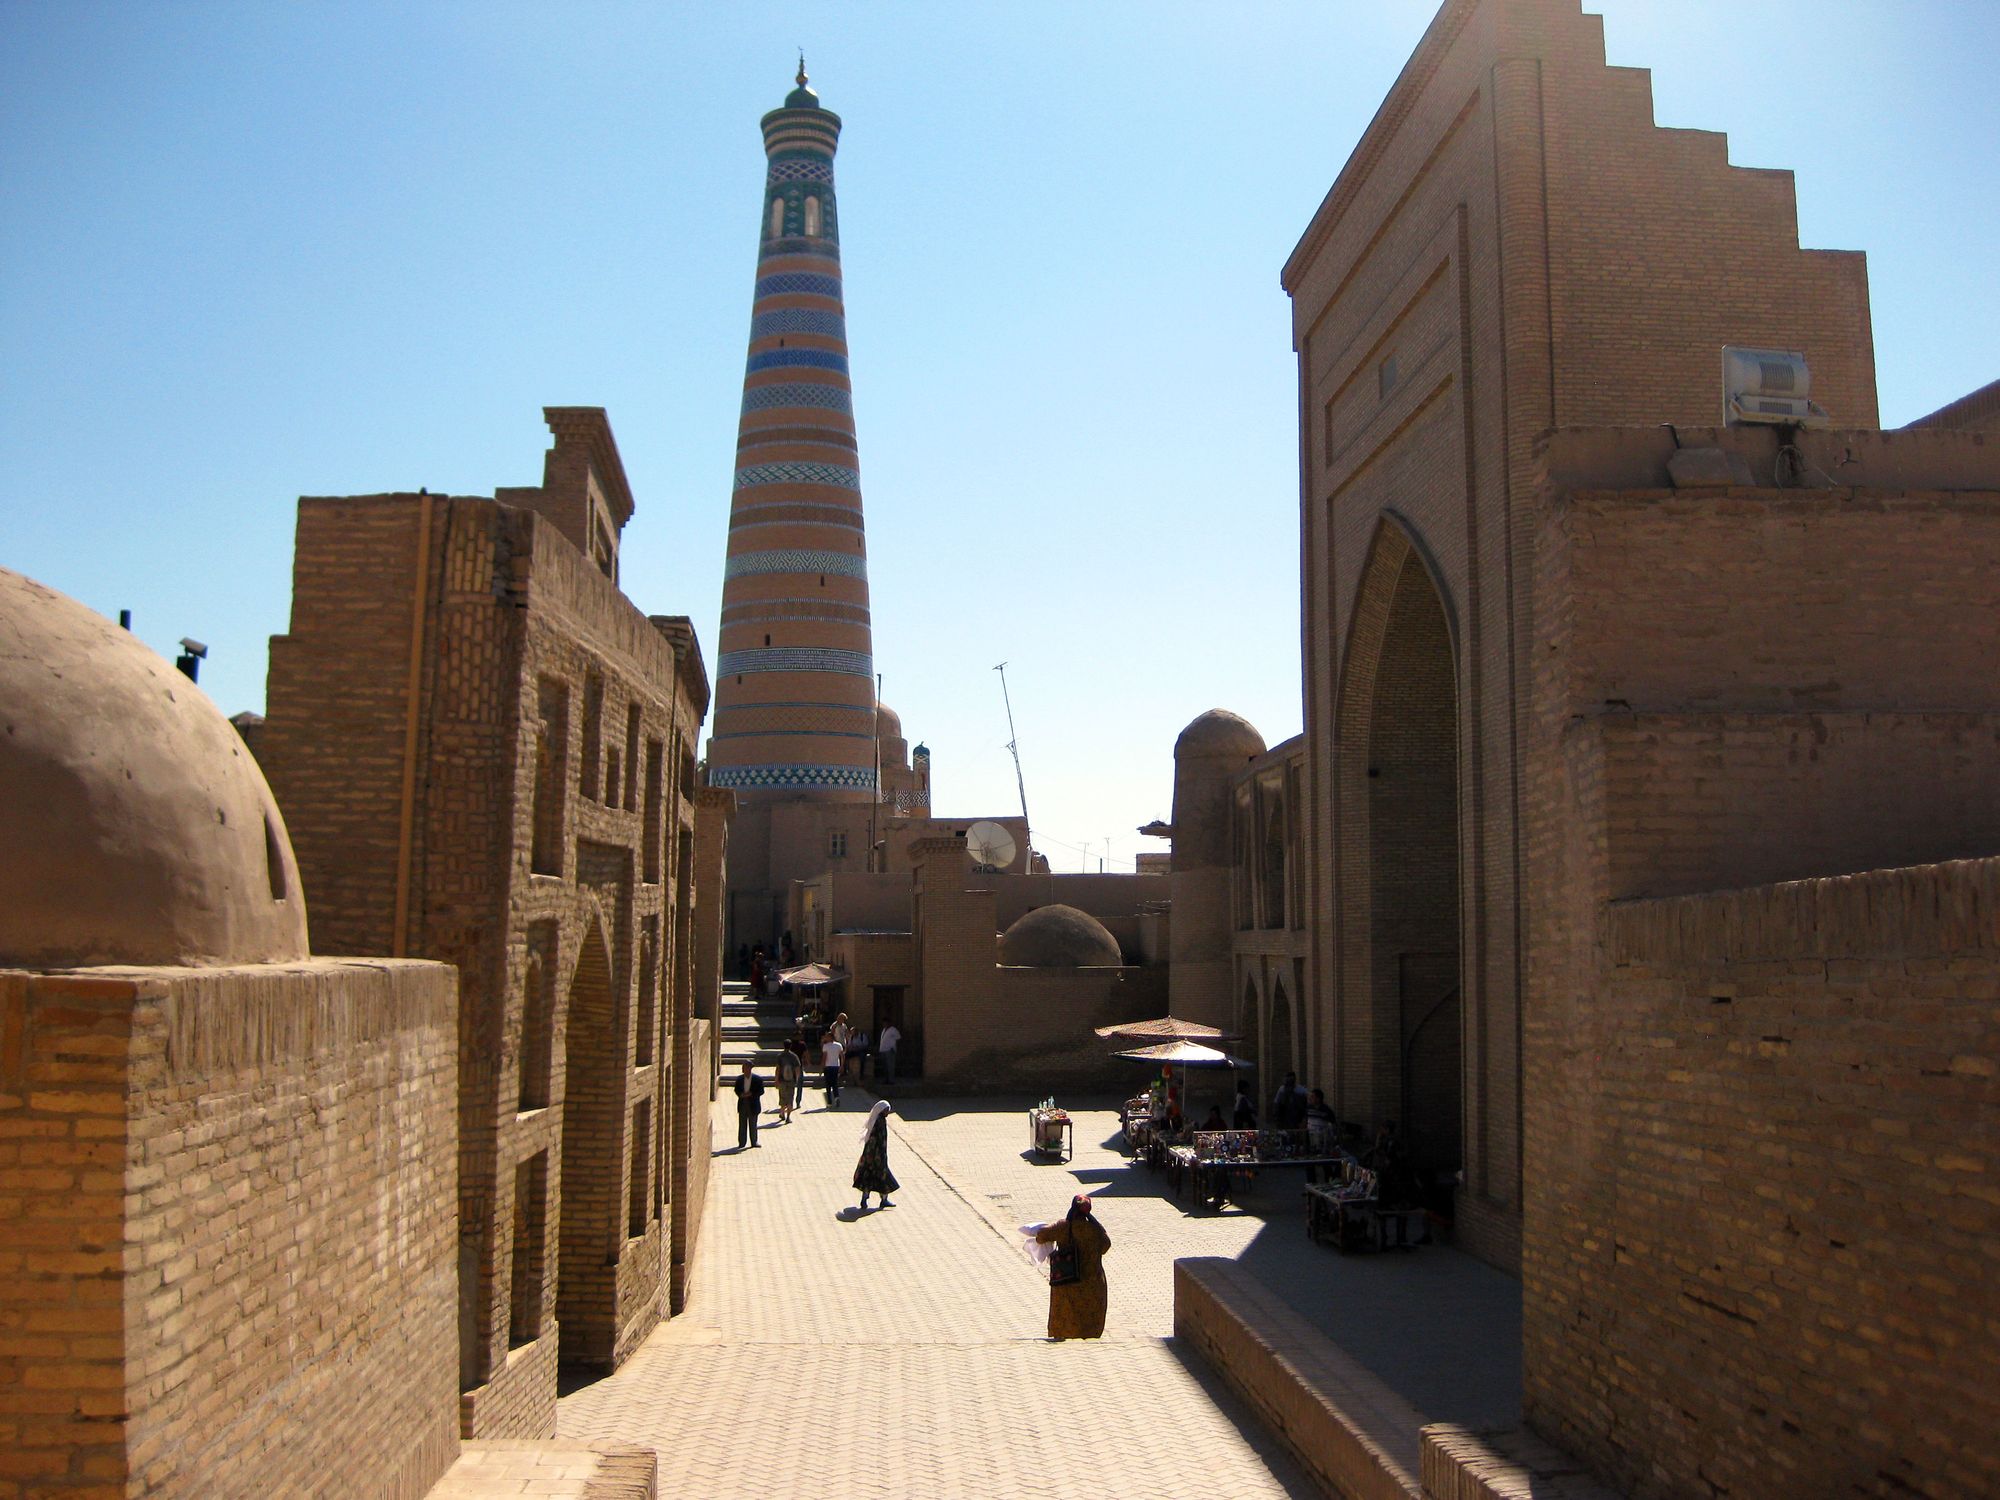 Khiva: In the court of the khan